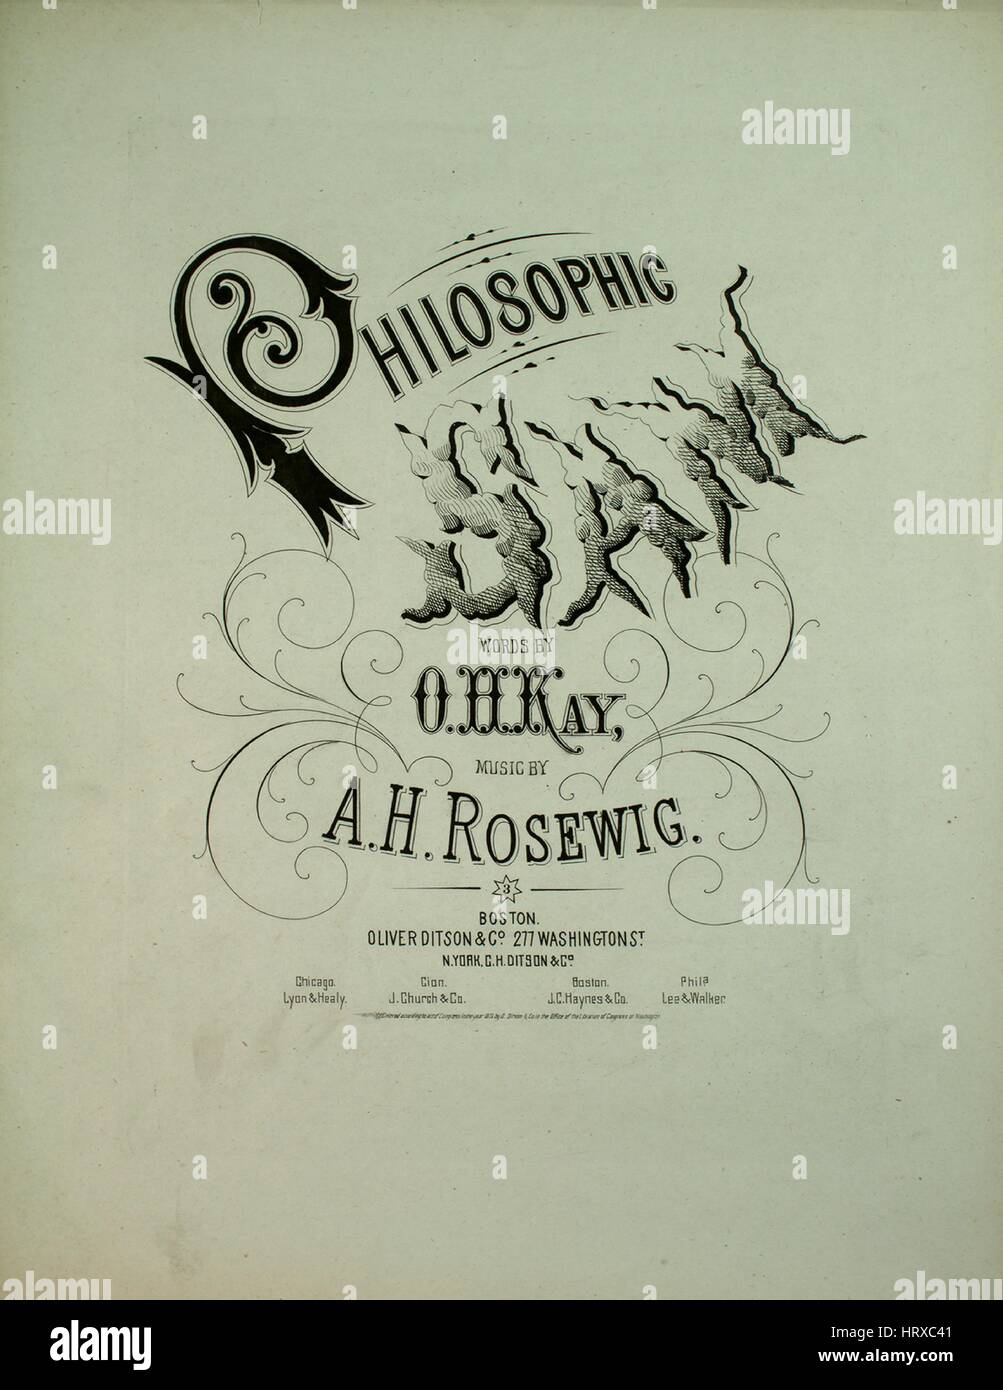 Sheet music cover image of the song 'Philosophic Sam', with original authorship notes reading 'Words by OH Kay Music by AH Rosewig', United States, 1873. The publisher is listed as 'Oliver Ditson and Co., 277 Washington St.', the form of composition is 'strophic with chorus', the instrumentation is 'piano and voice (solo and satb chorus)', the first line reads 'Where'er I am the ladies throng, and as on me they gaze', and the illustration artist is listed as 'None'. Stock Photo